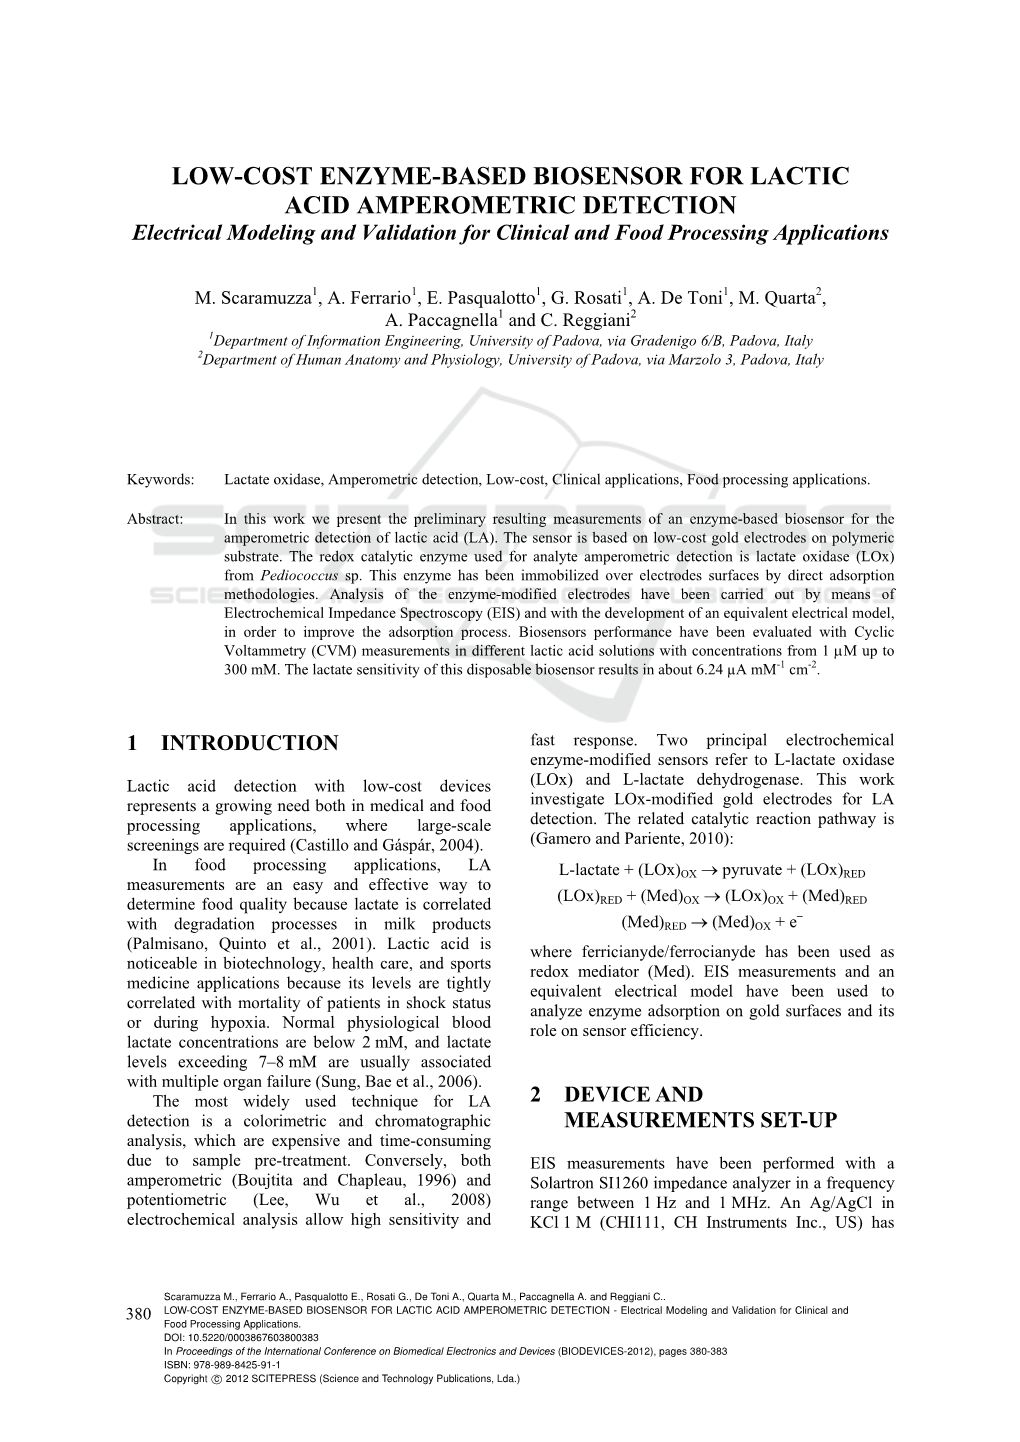 LOW-COST ENZYME-BASED BIOSENSOR for LACTIC ACID AMPEROMETRIC DETECTION Electrical Modeling and Validation for Clinical and Food Processing Applications